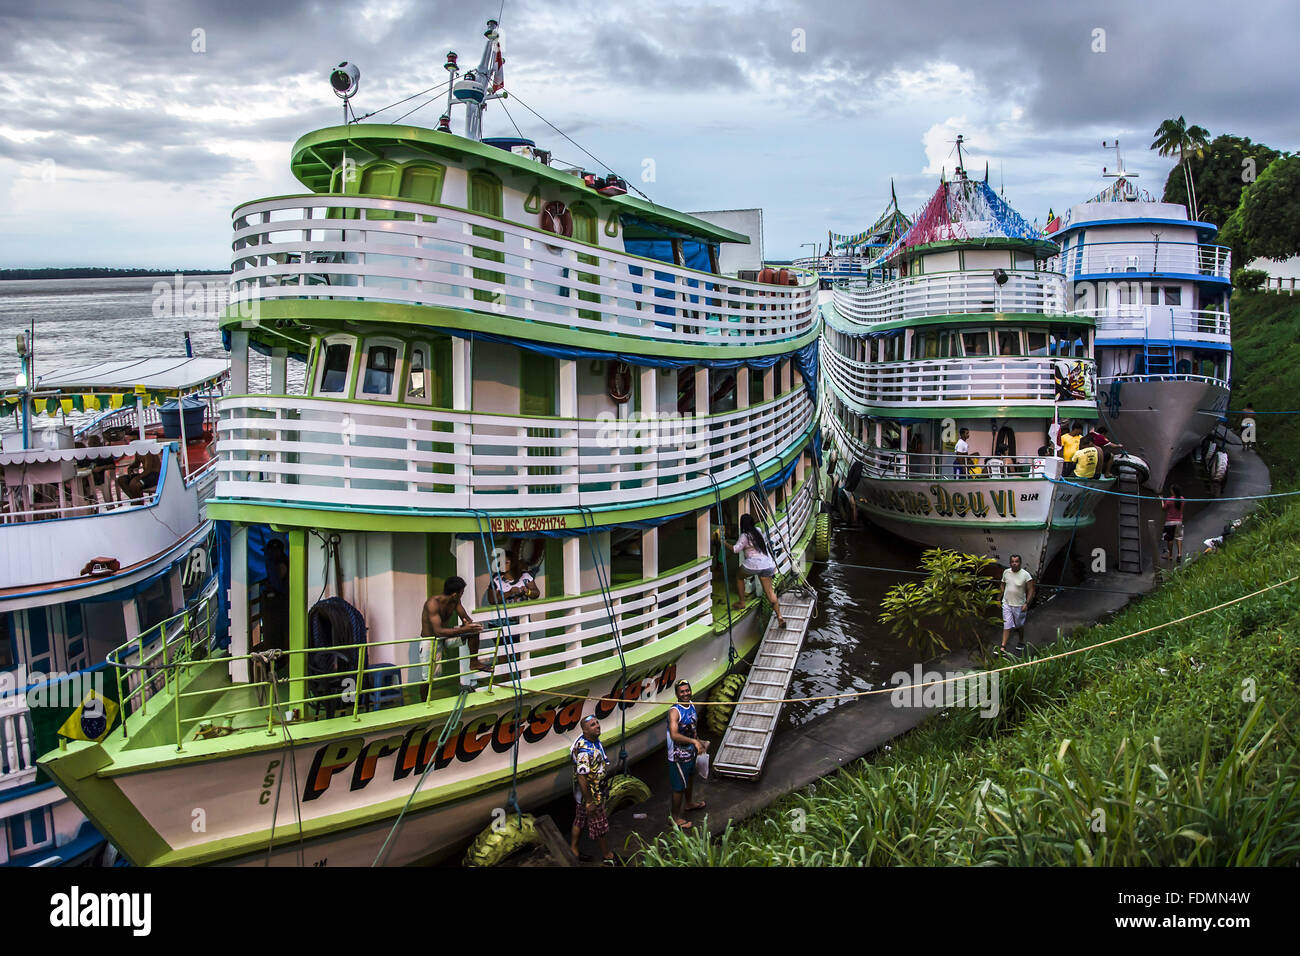 Boats in the Amazon region known as Recreation moored in the harbor on the bank of the Amazon River Stock Photo